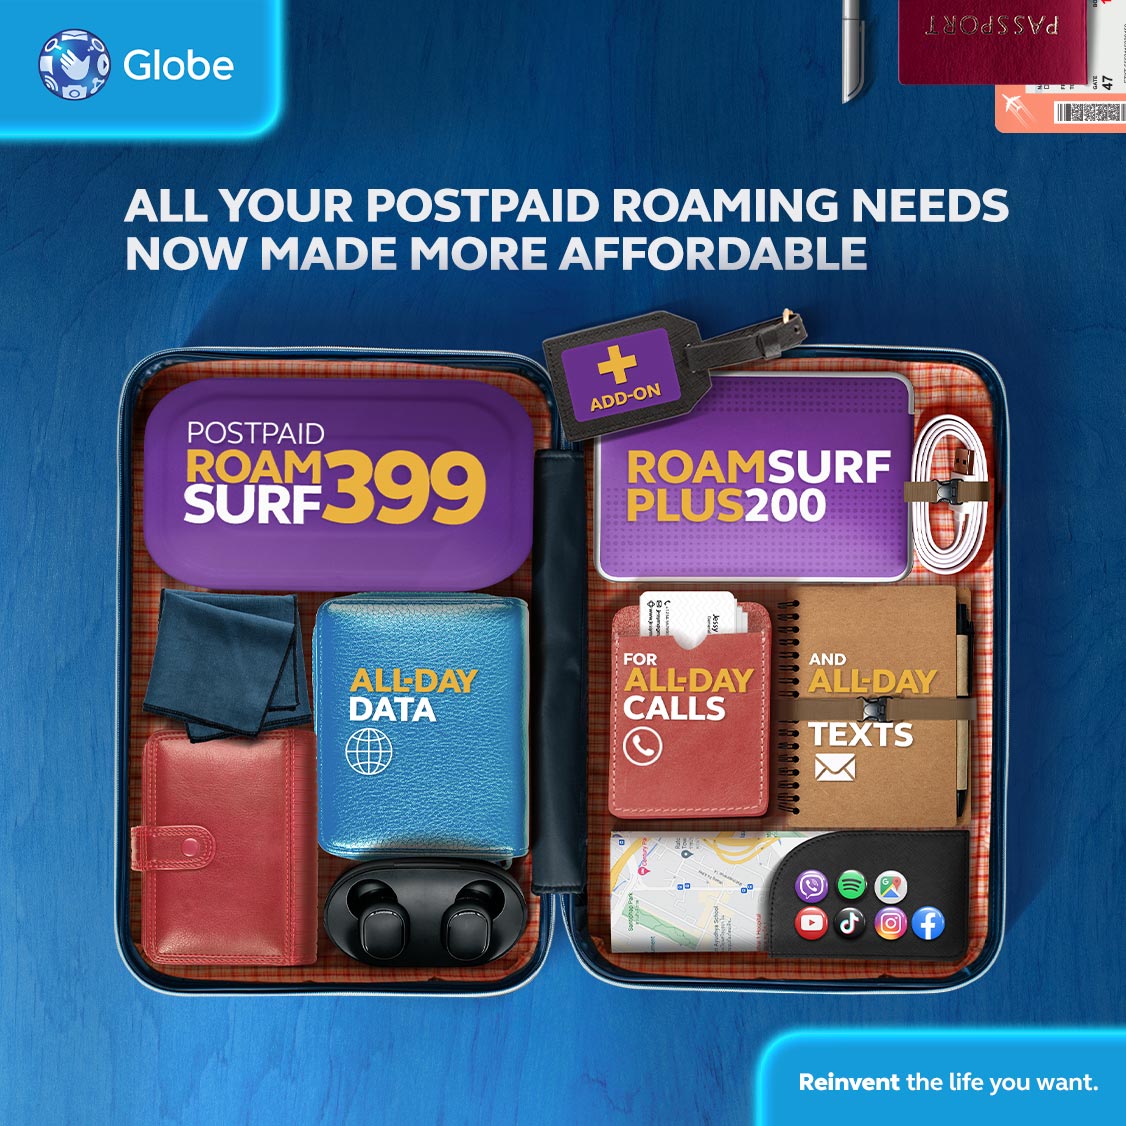 Globe reinvents roaming essentials for Filipino travelers amid pandemic